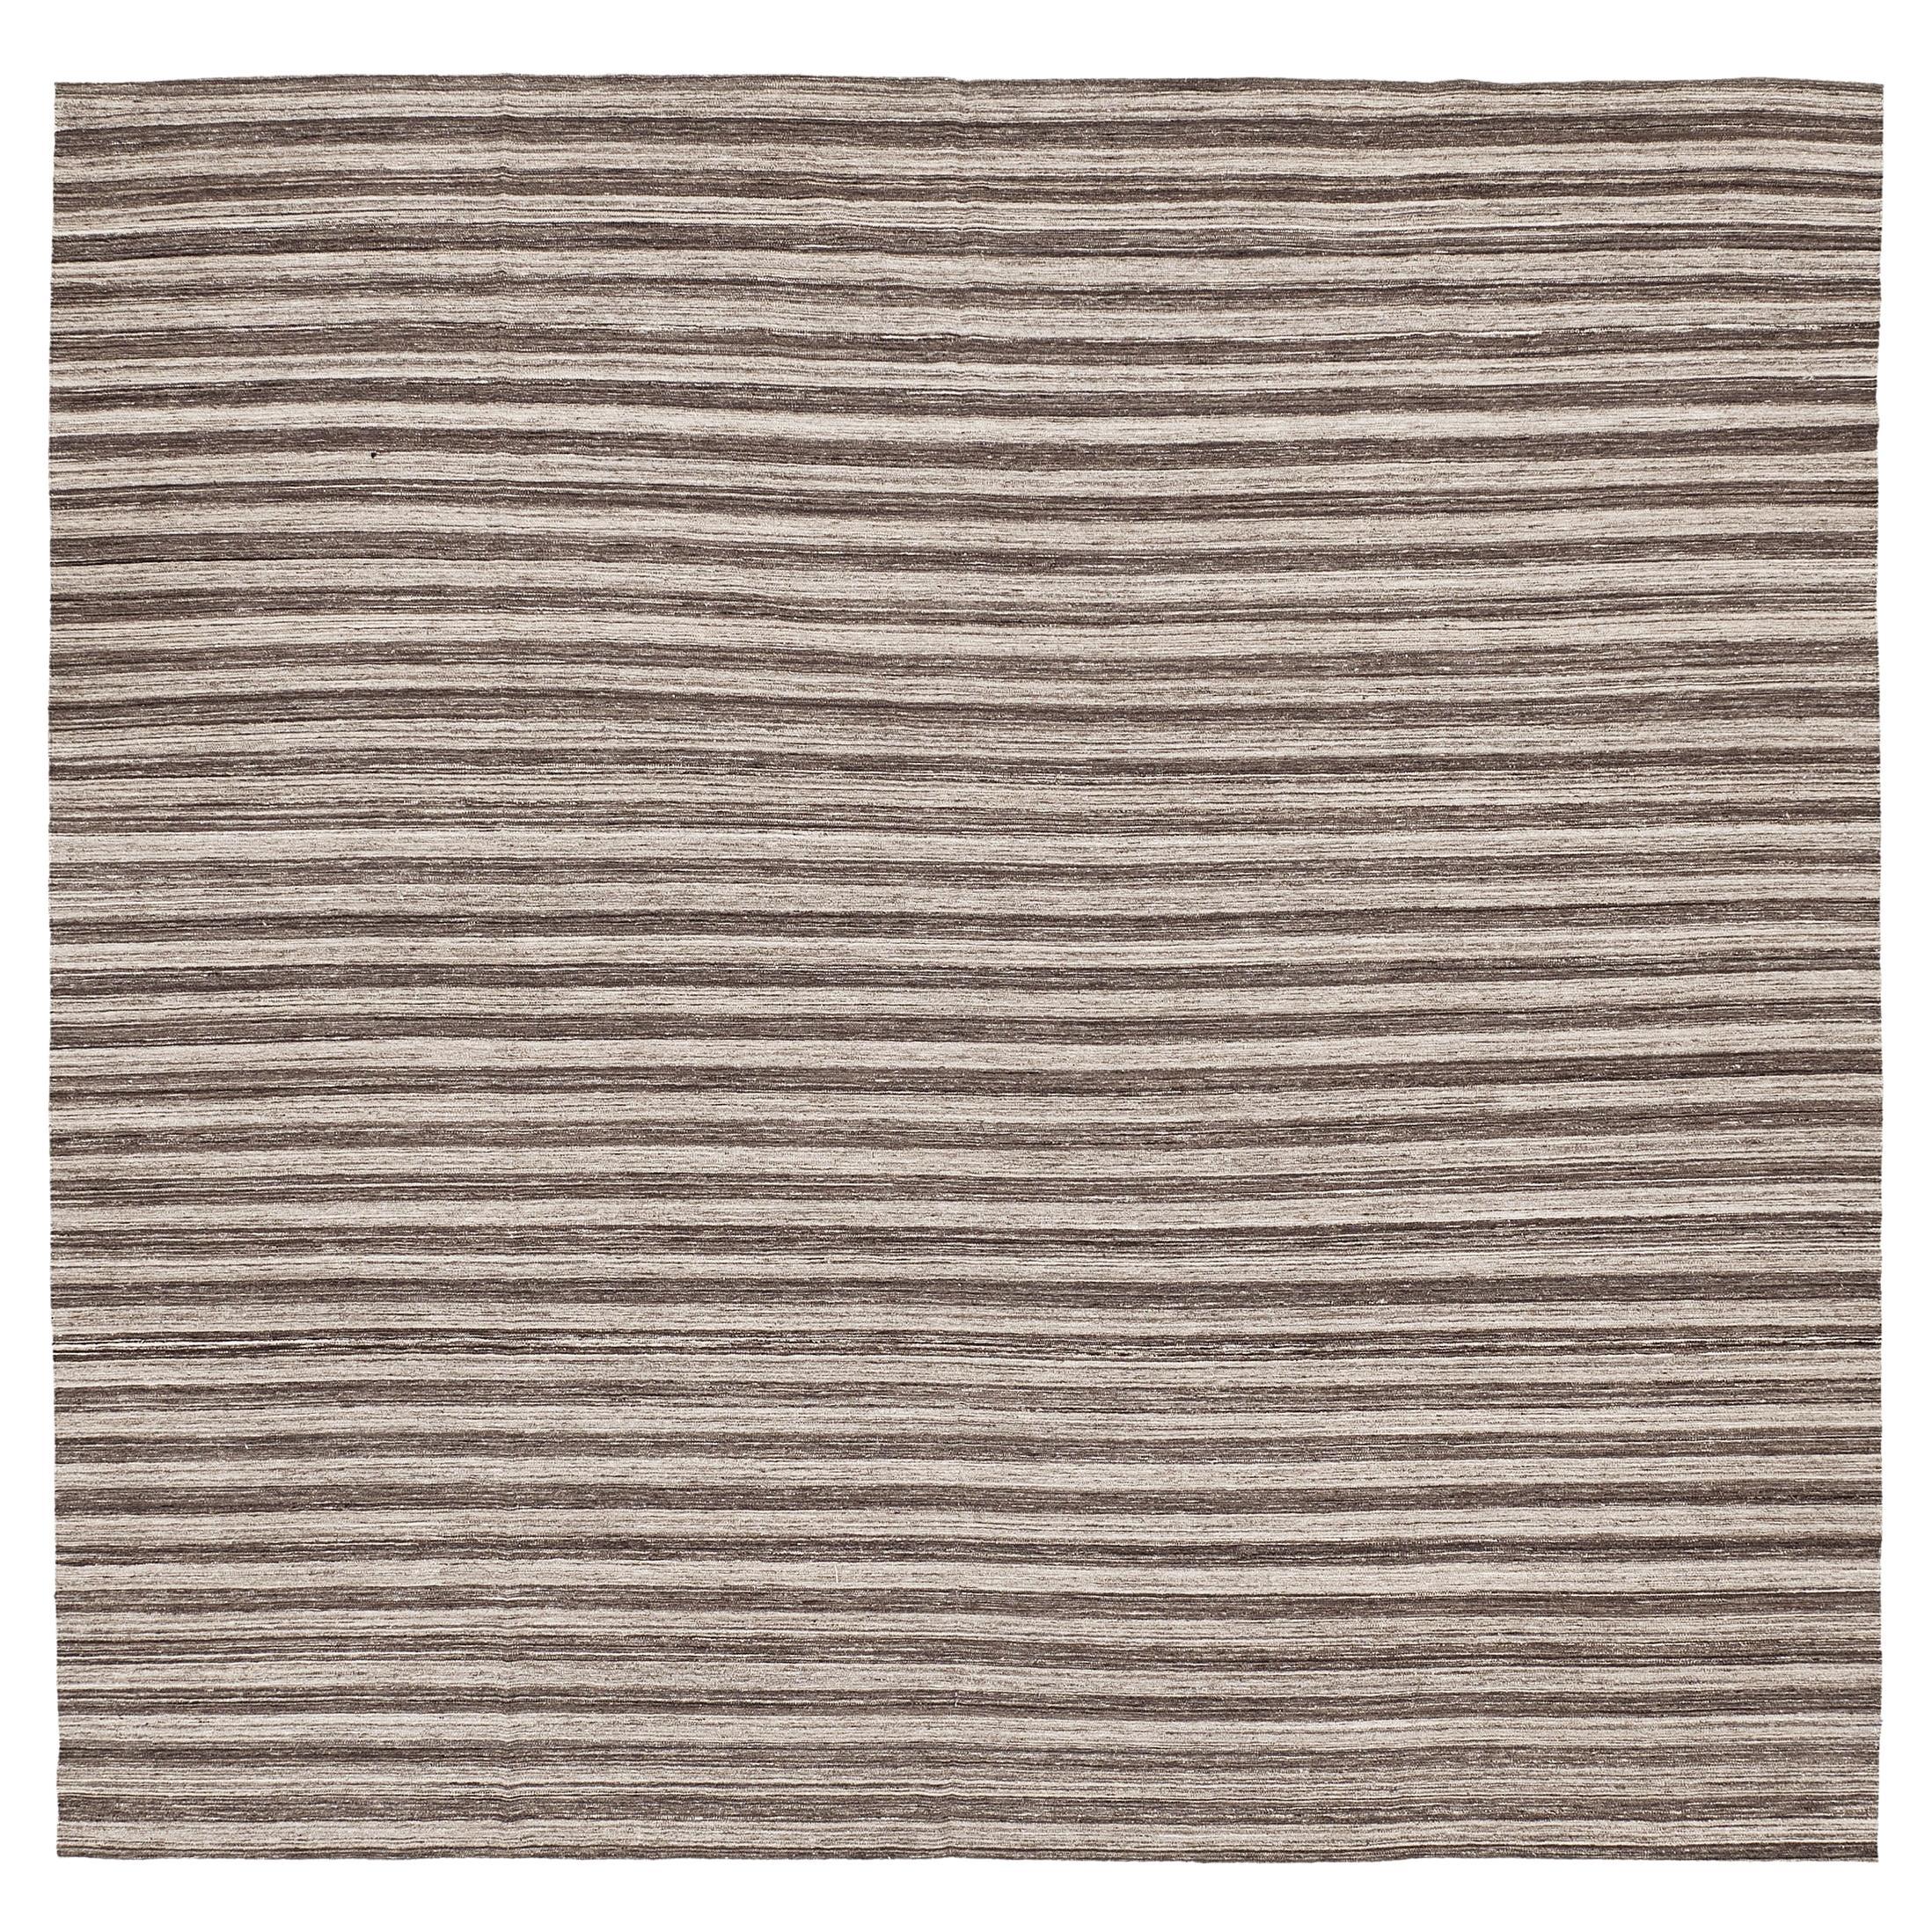 Mehraban Natural Dye Flat Weave Kilim Puro Collection Square Rug For Sale